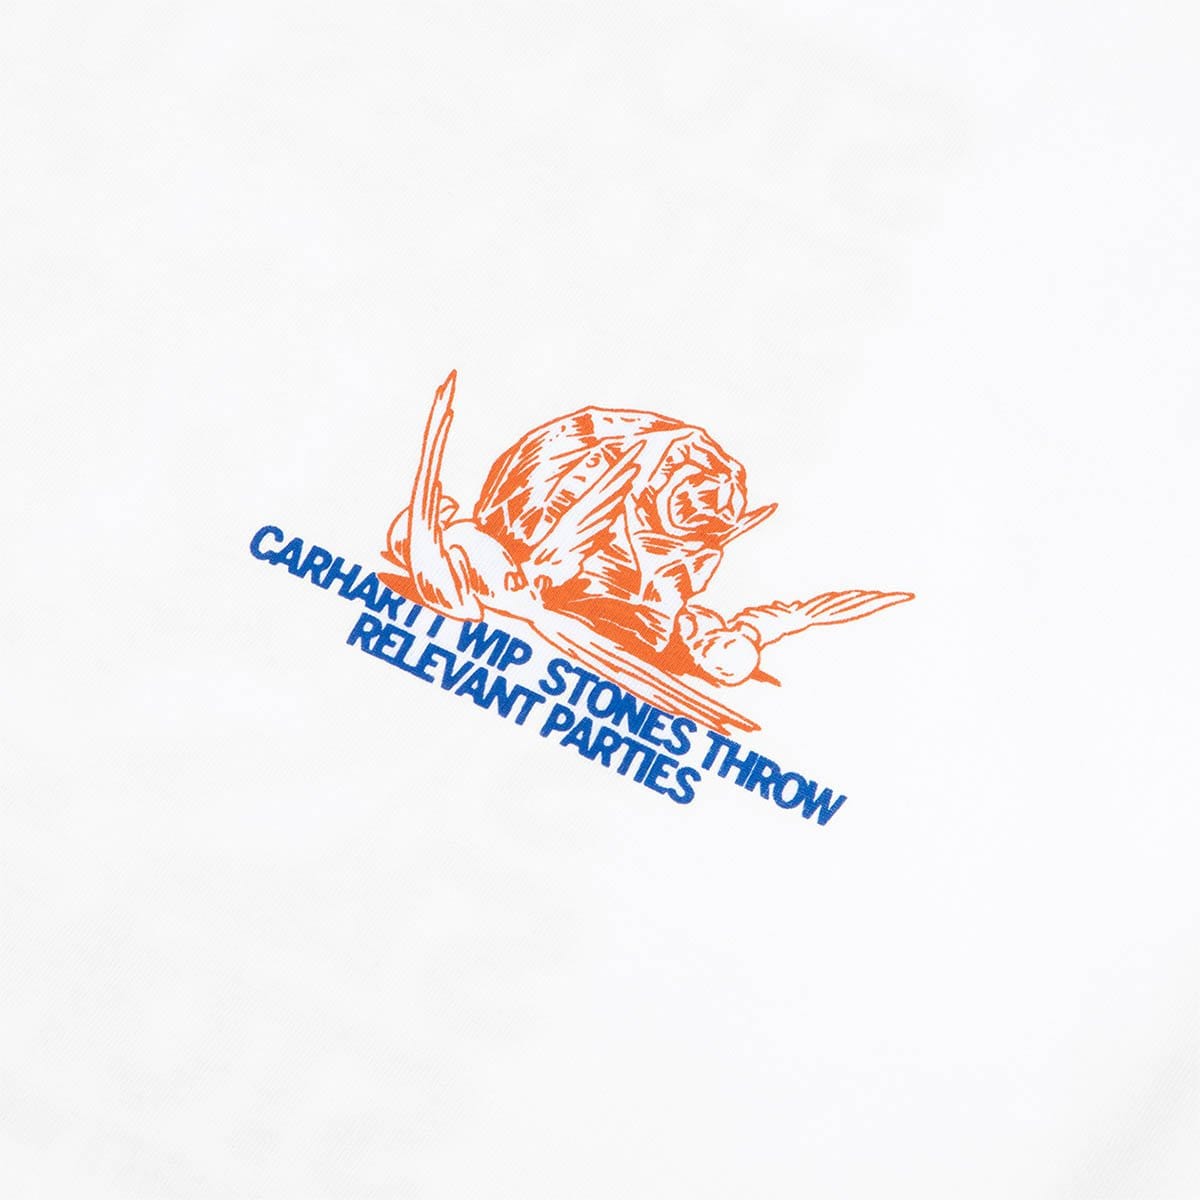 Carhartt W.I.P. T-Shirts Relevant Parties SS STONE THROW T-SHIRT